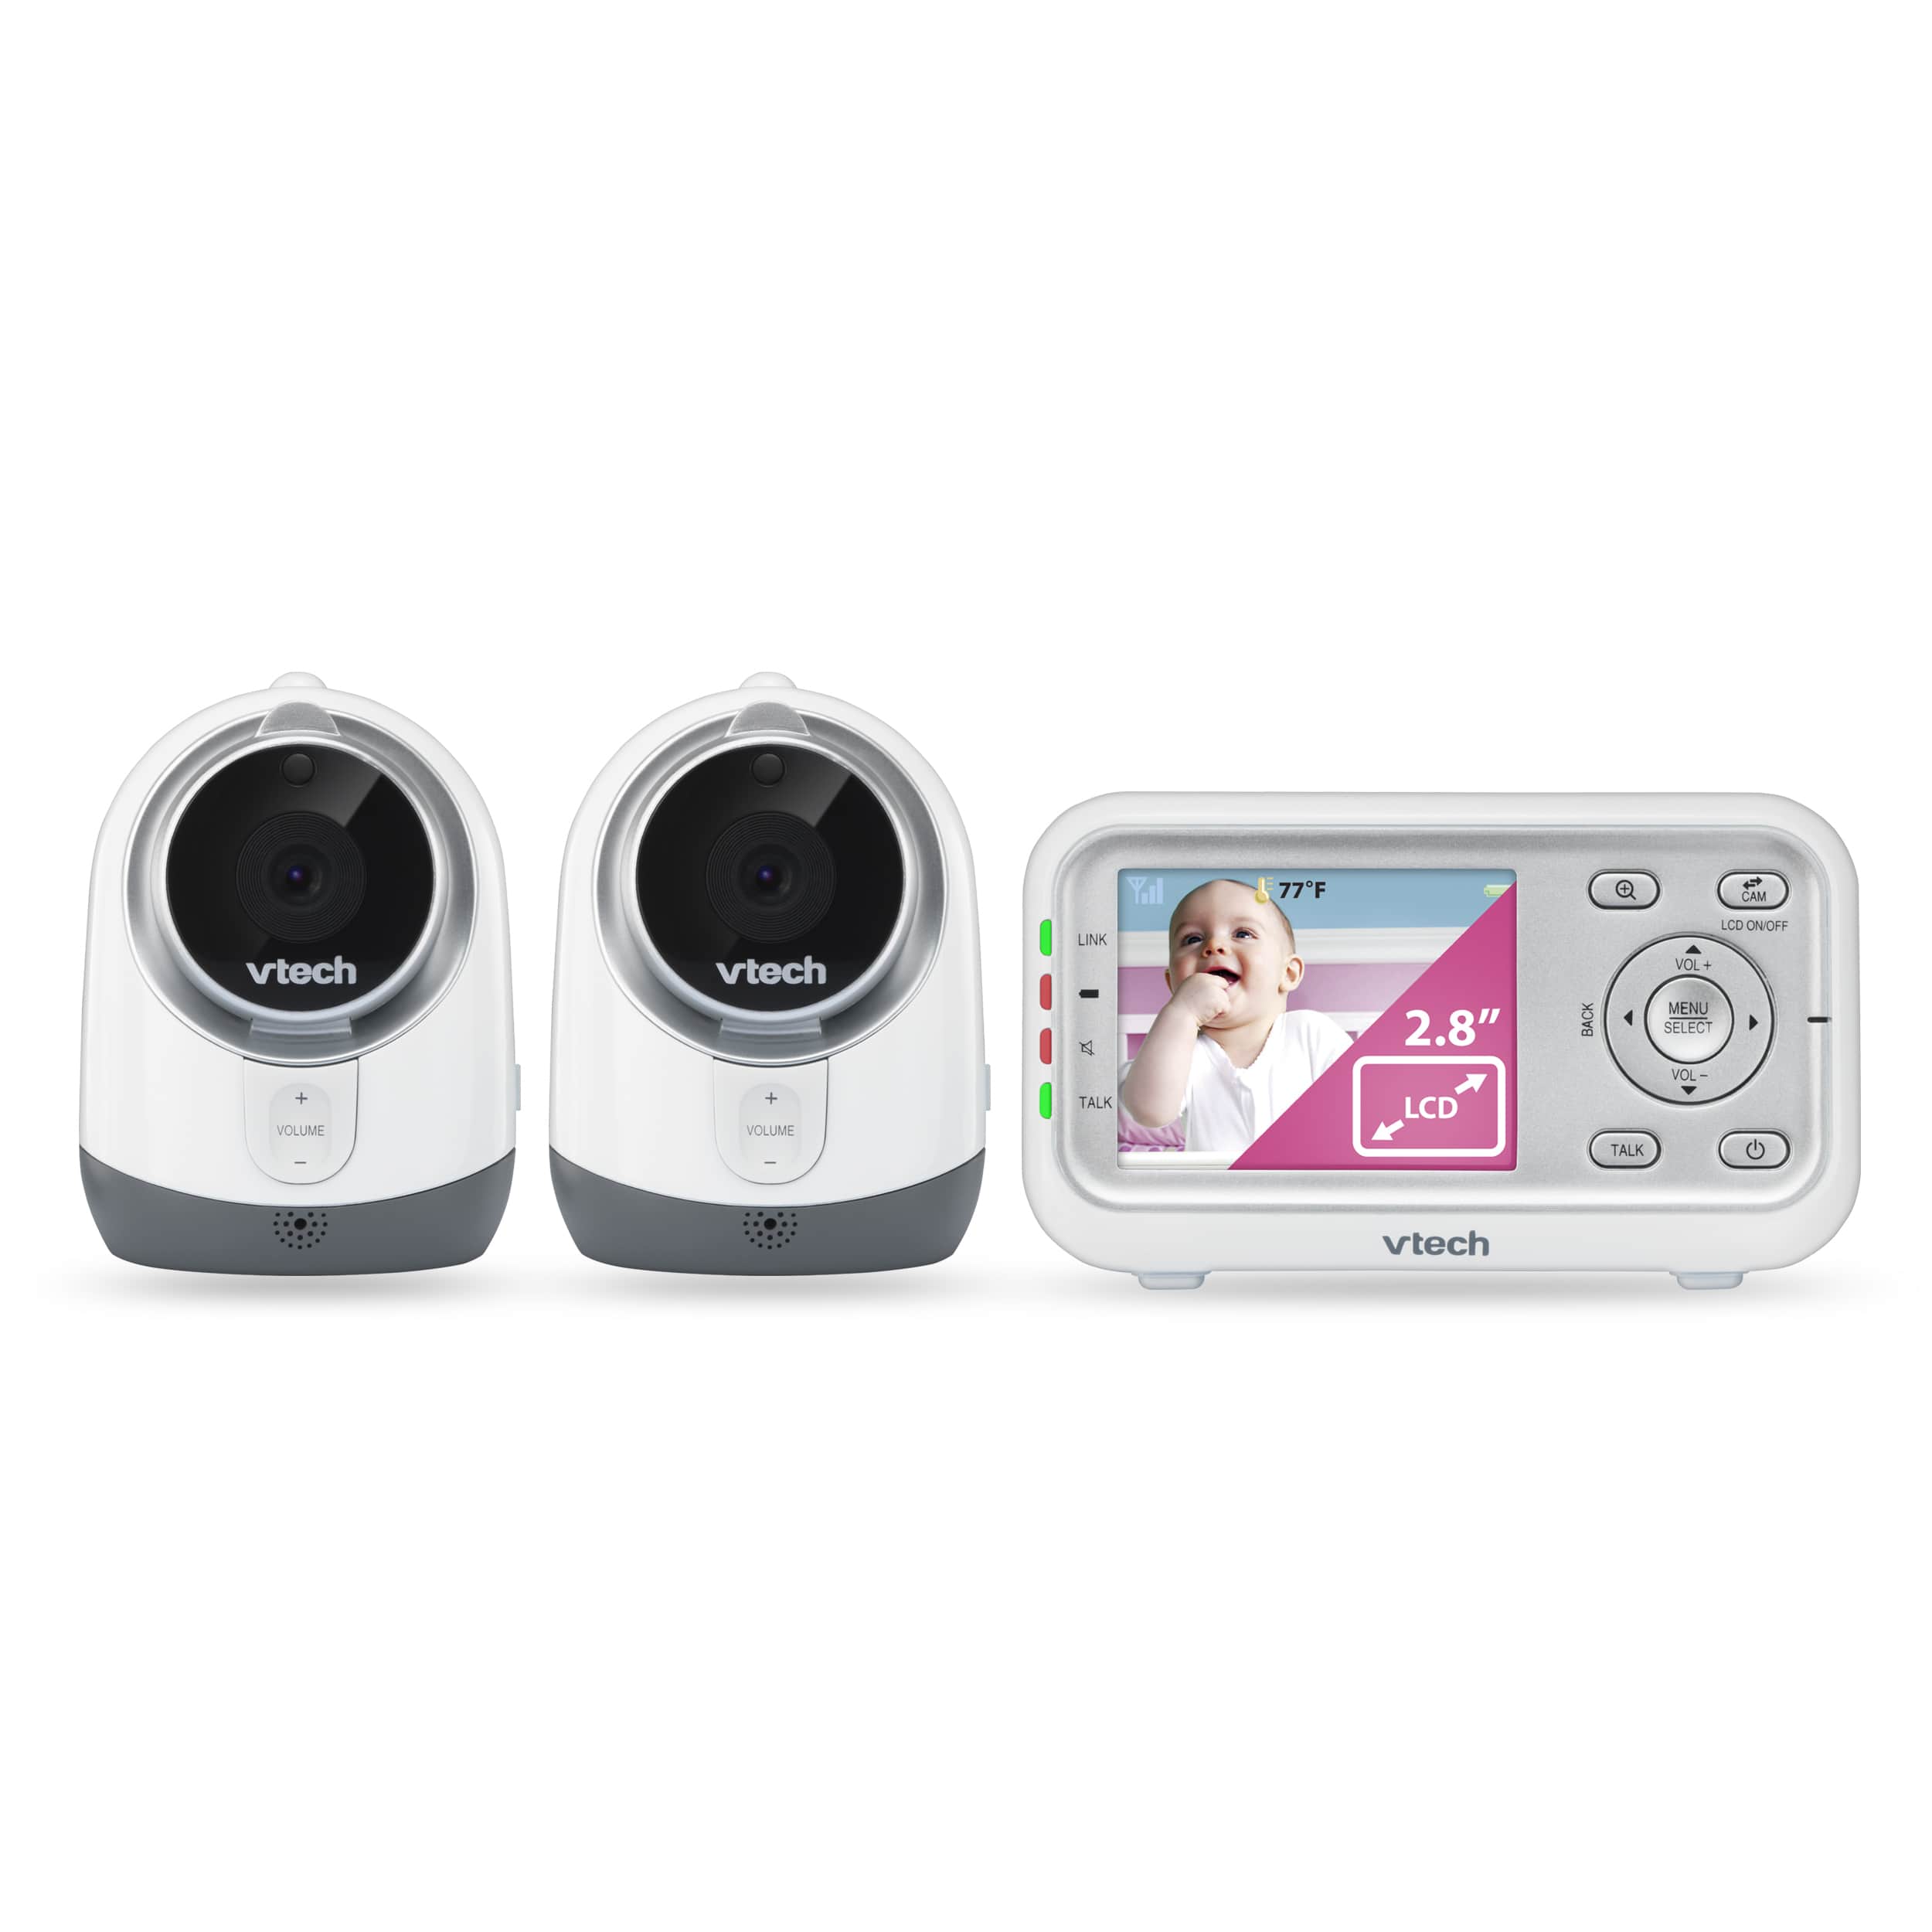 vtech baby monitor camera not working